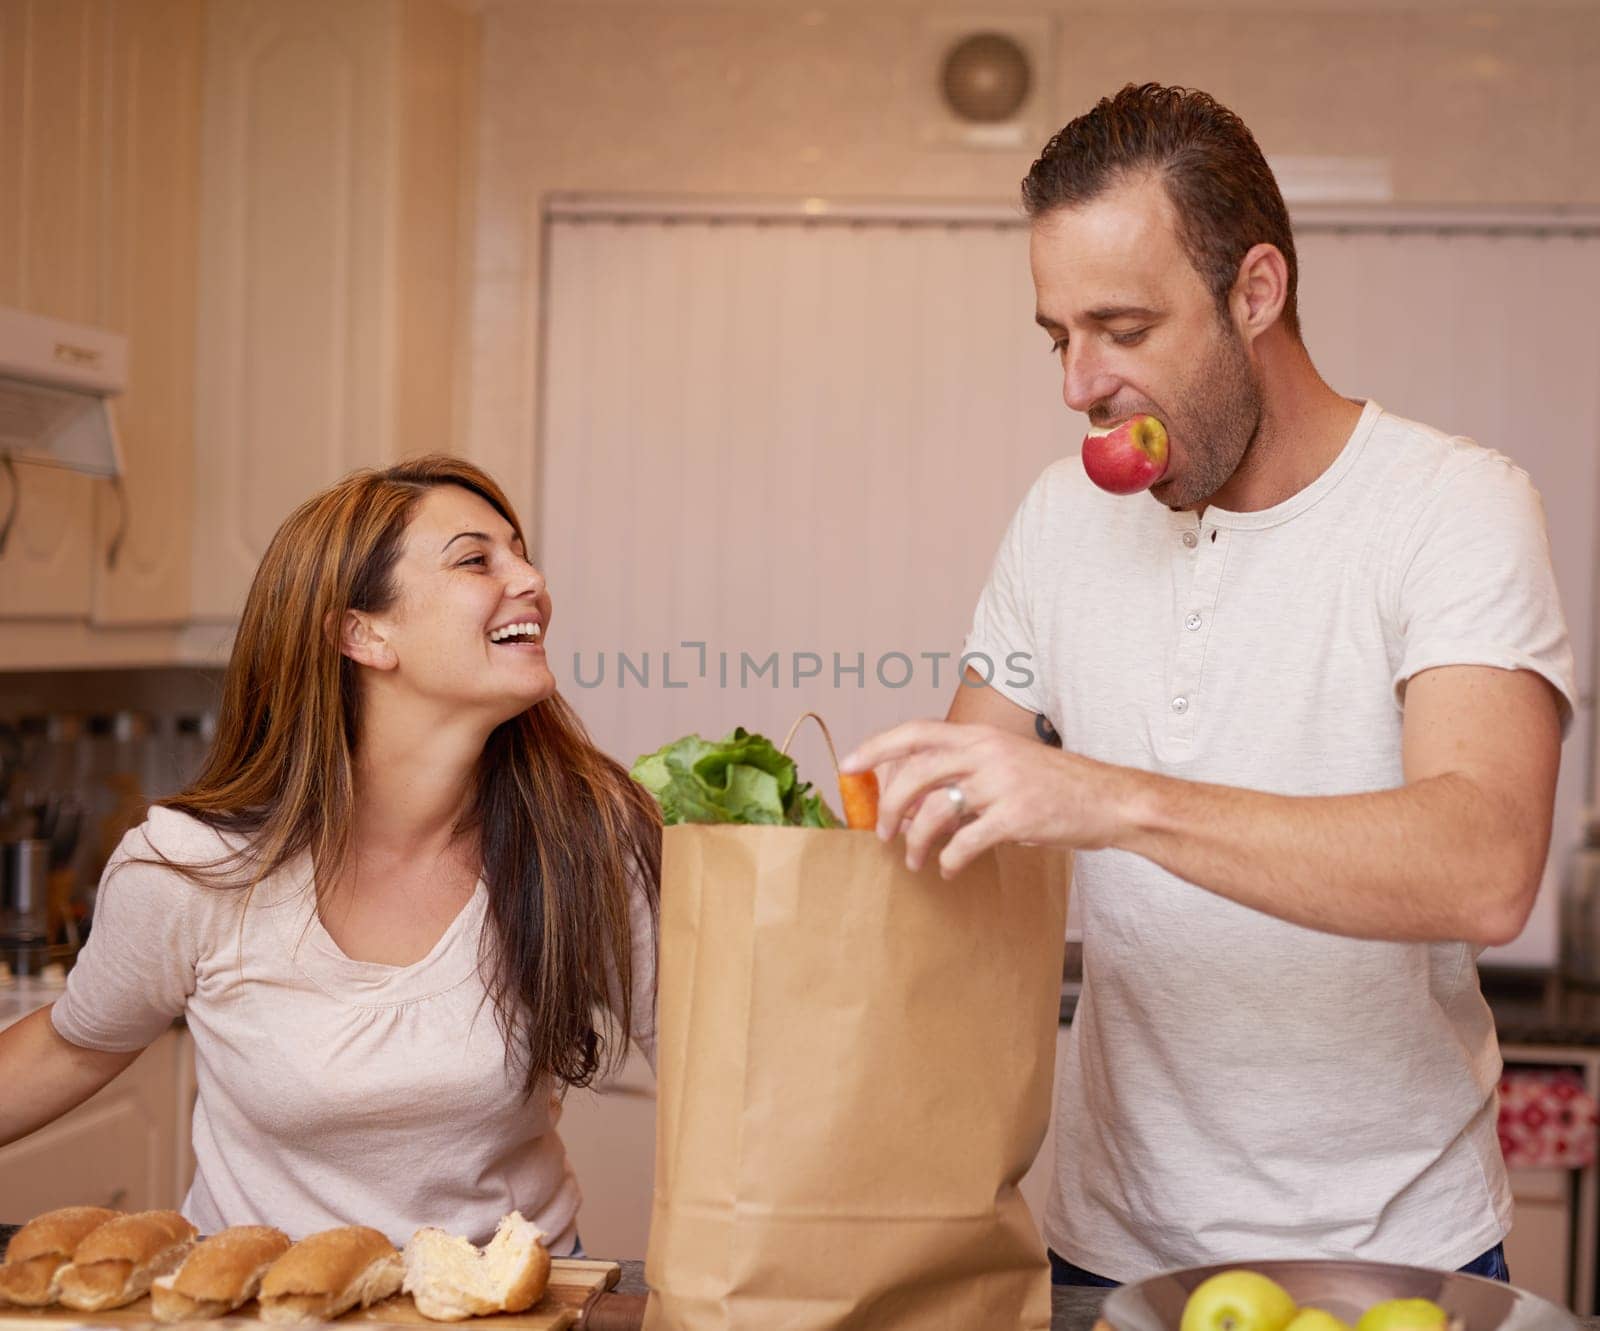 Brown bag, kitchen and couple with groceries, vegetables and funny with conversation and chatting. Healthy meal, food and ingredients with fruit and wellness with humor, home and laughing for joke.